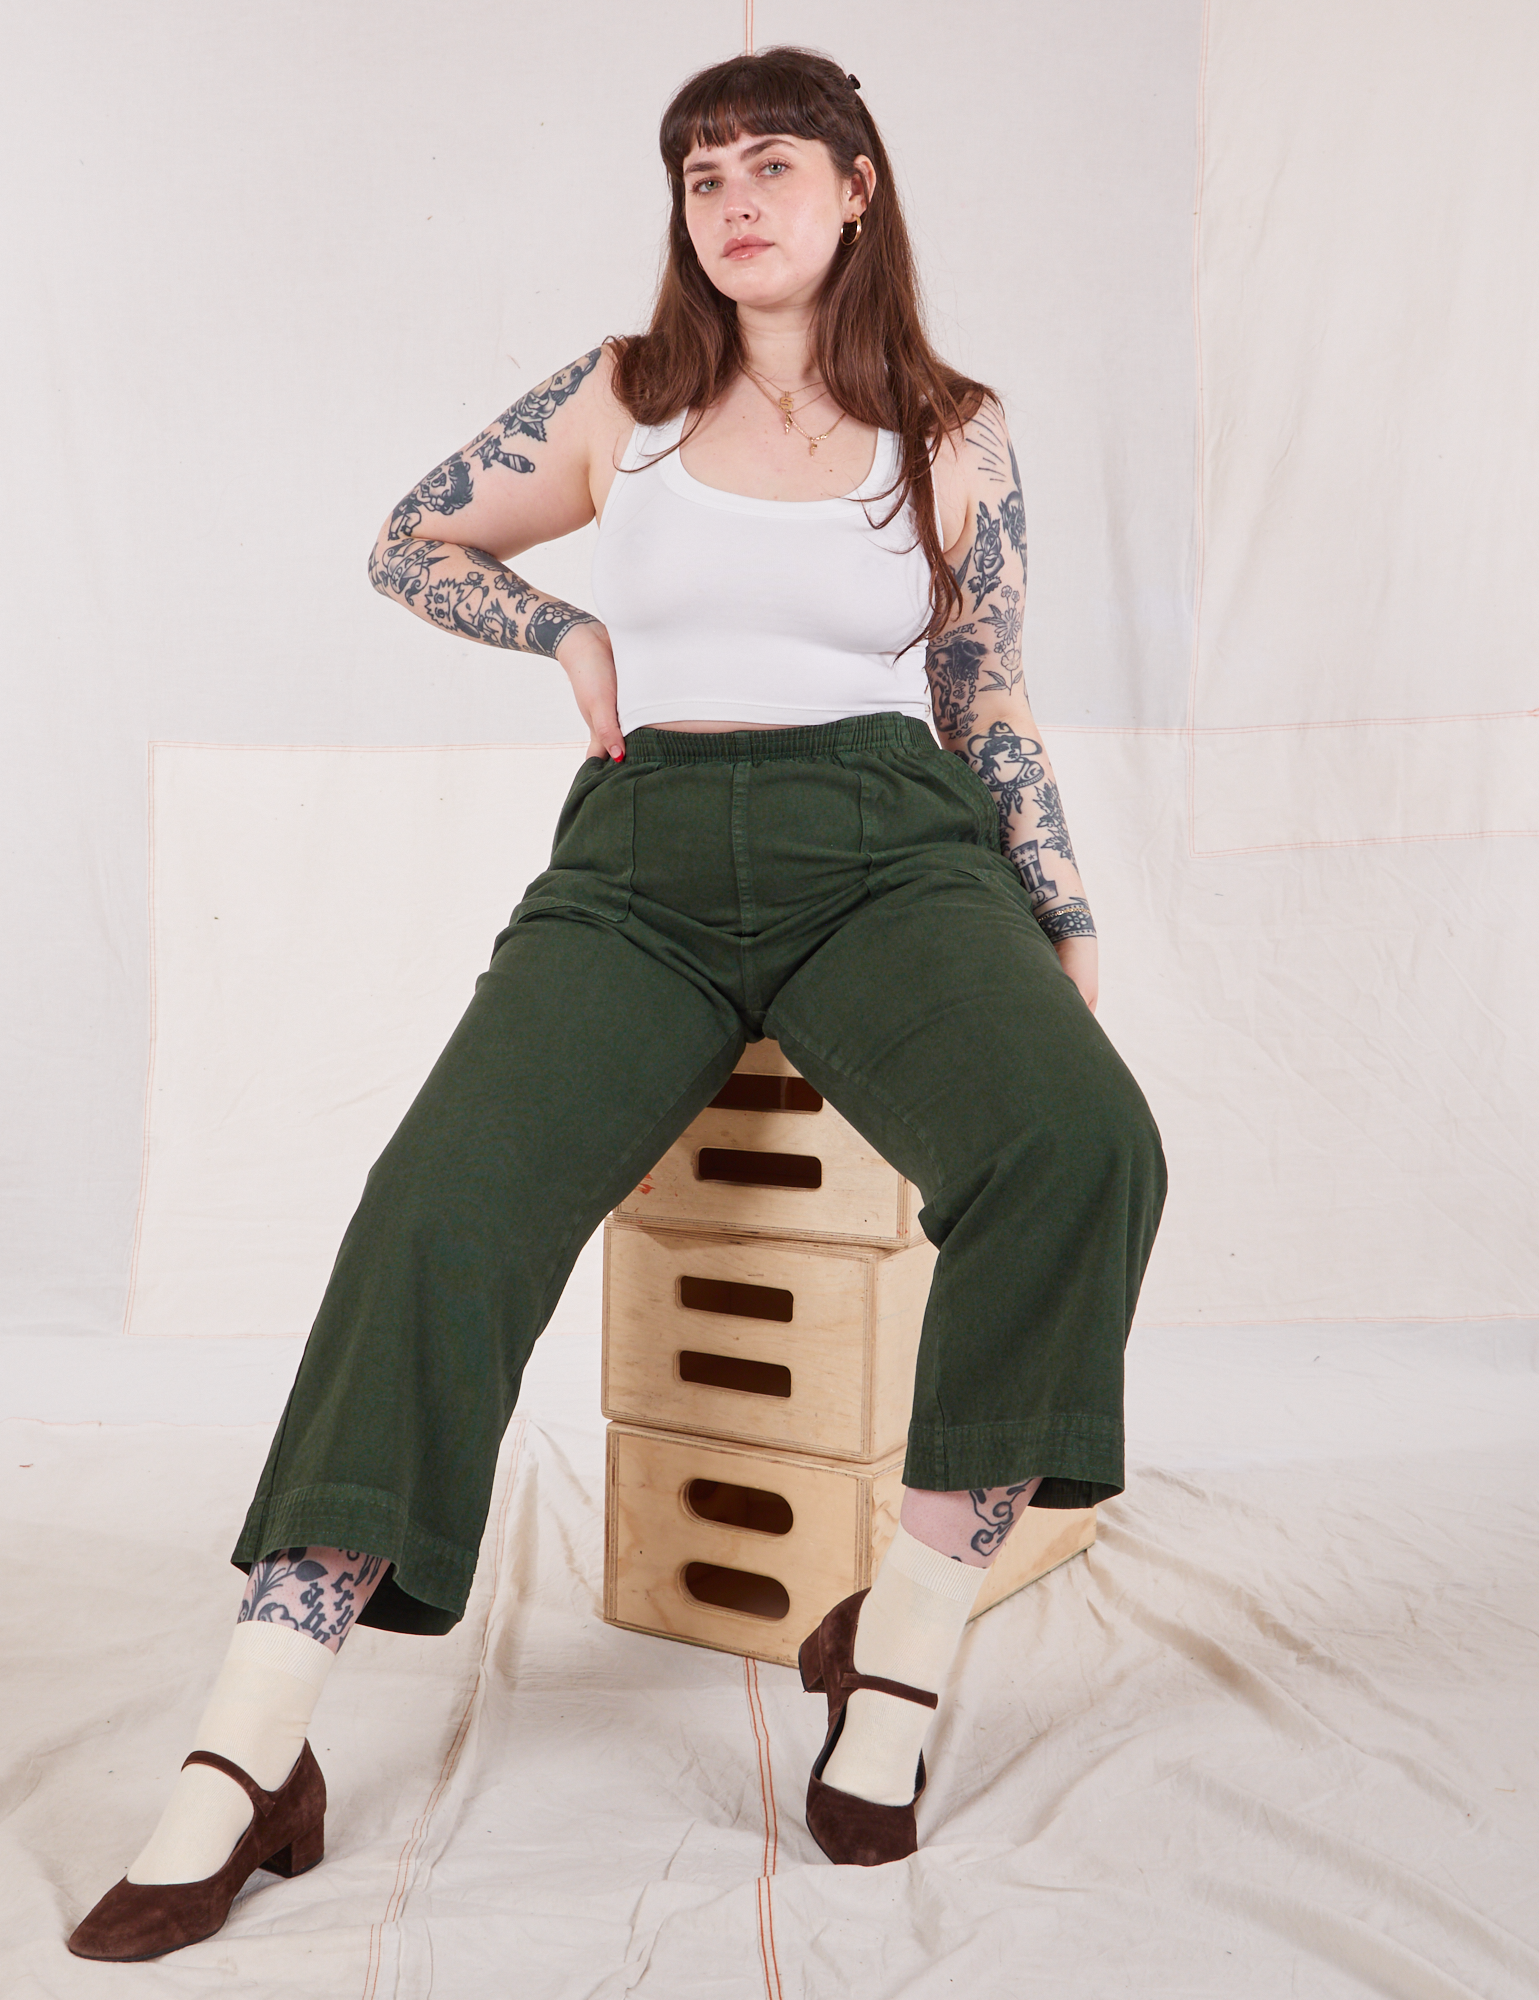 Sydney is wearing Action Pants in Swamp Green and Cropped Tank in vintage tee off-white